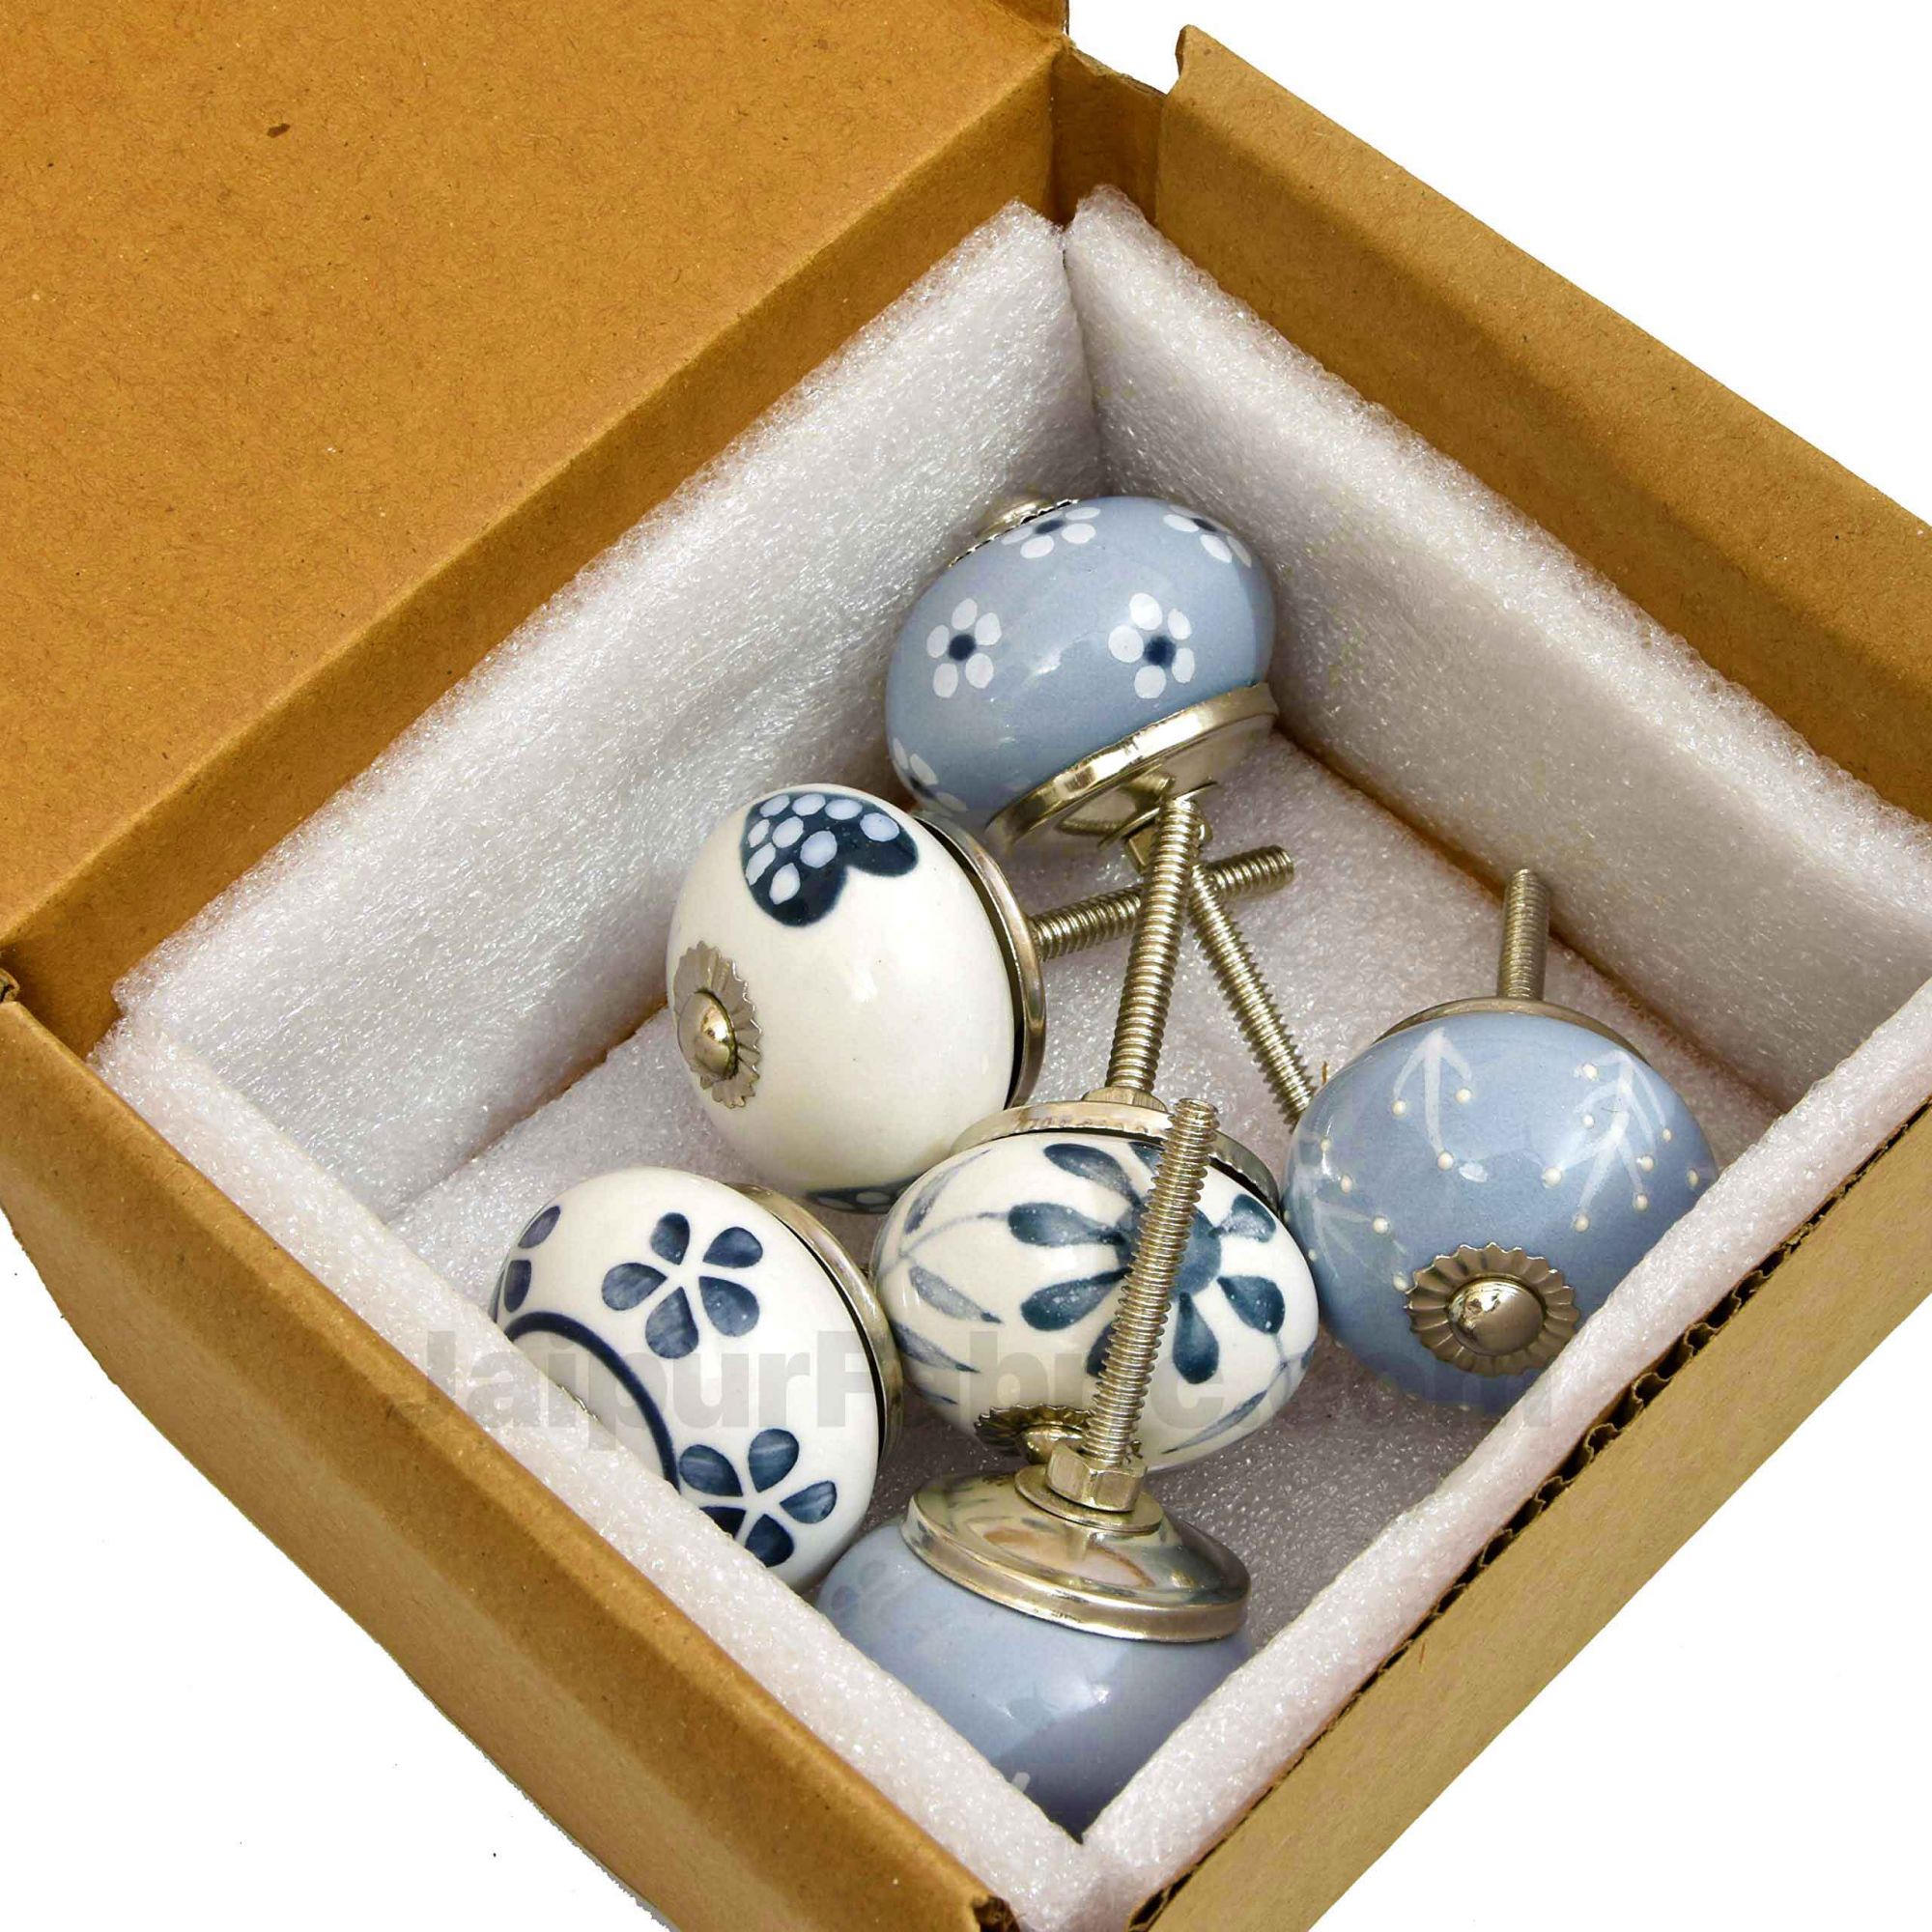 English Ceramic Knob Set of 6 Pcs Fabricated Knobs for Doors and Cabinets with Brass Blue Pottery